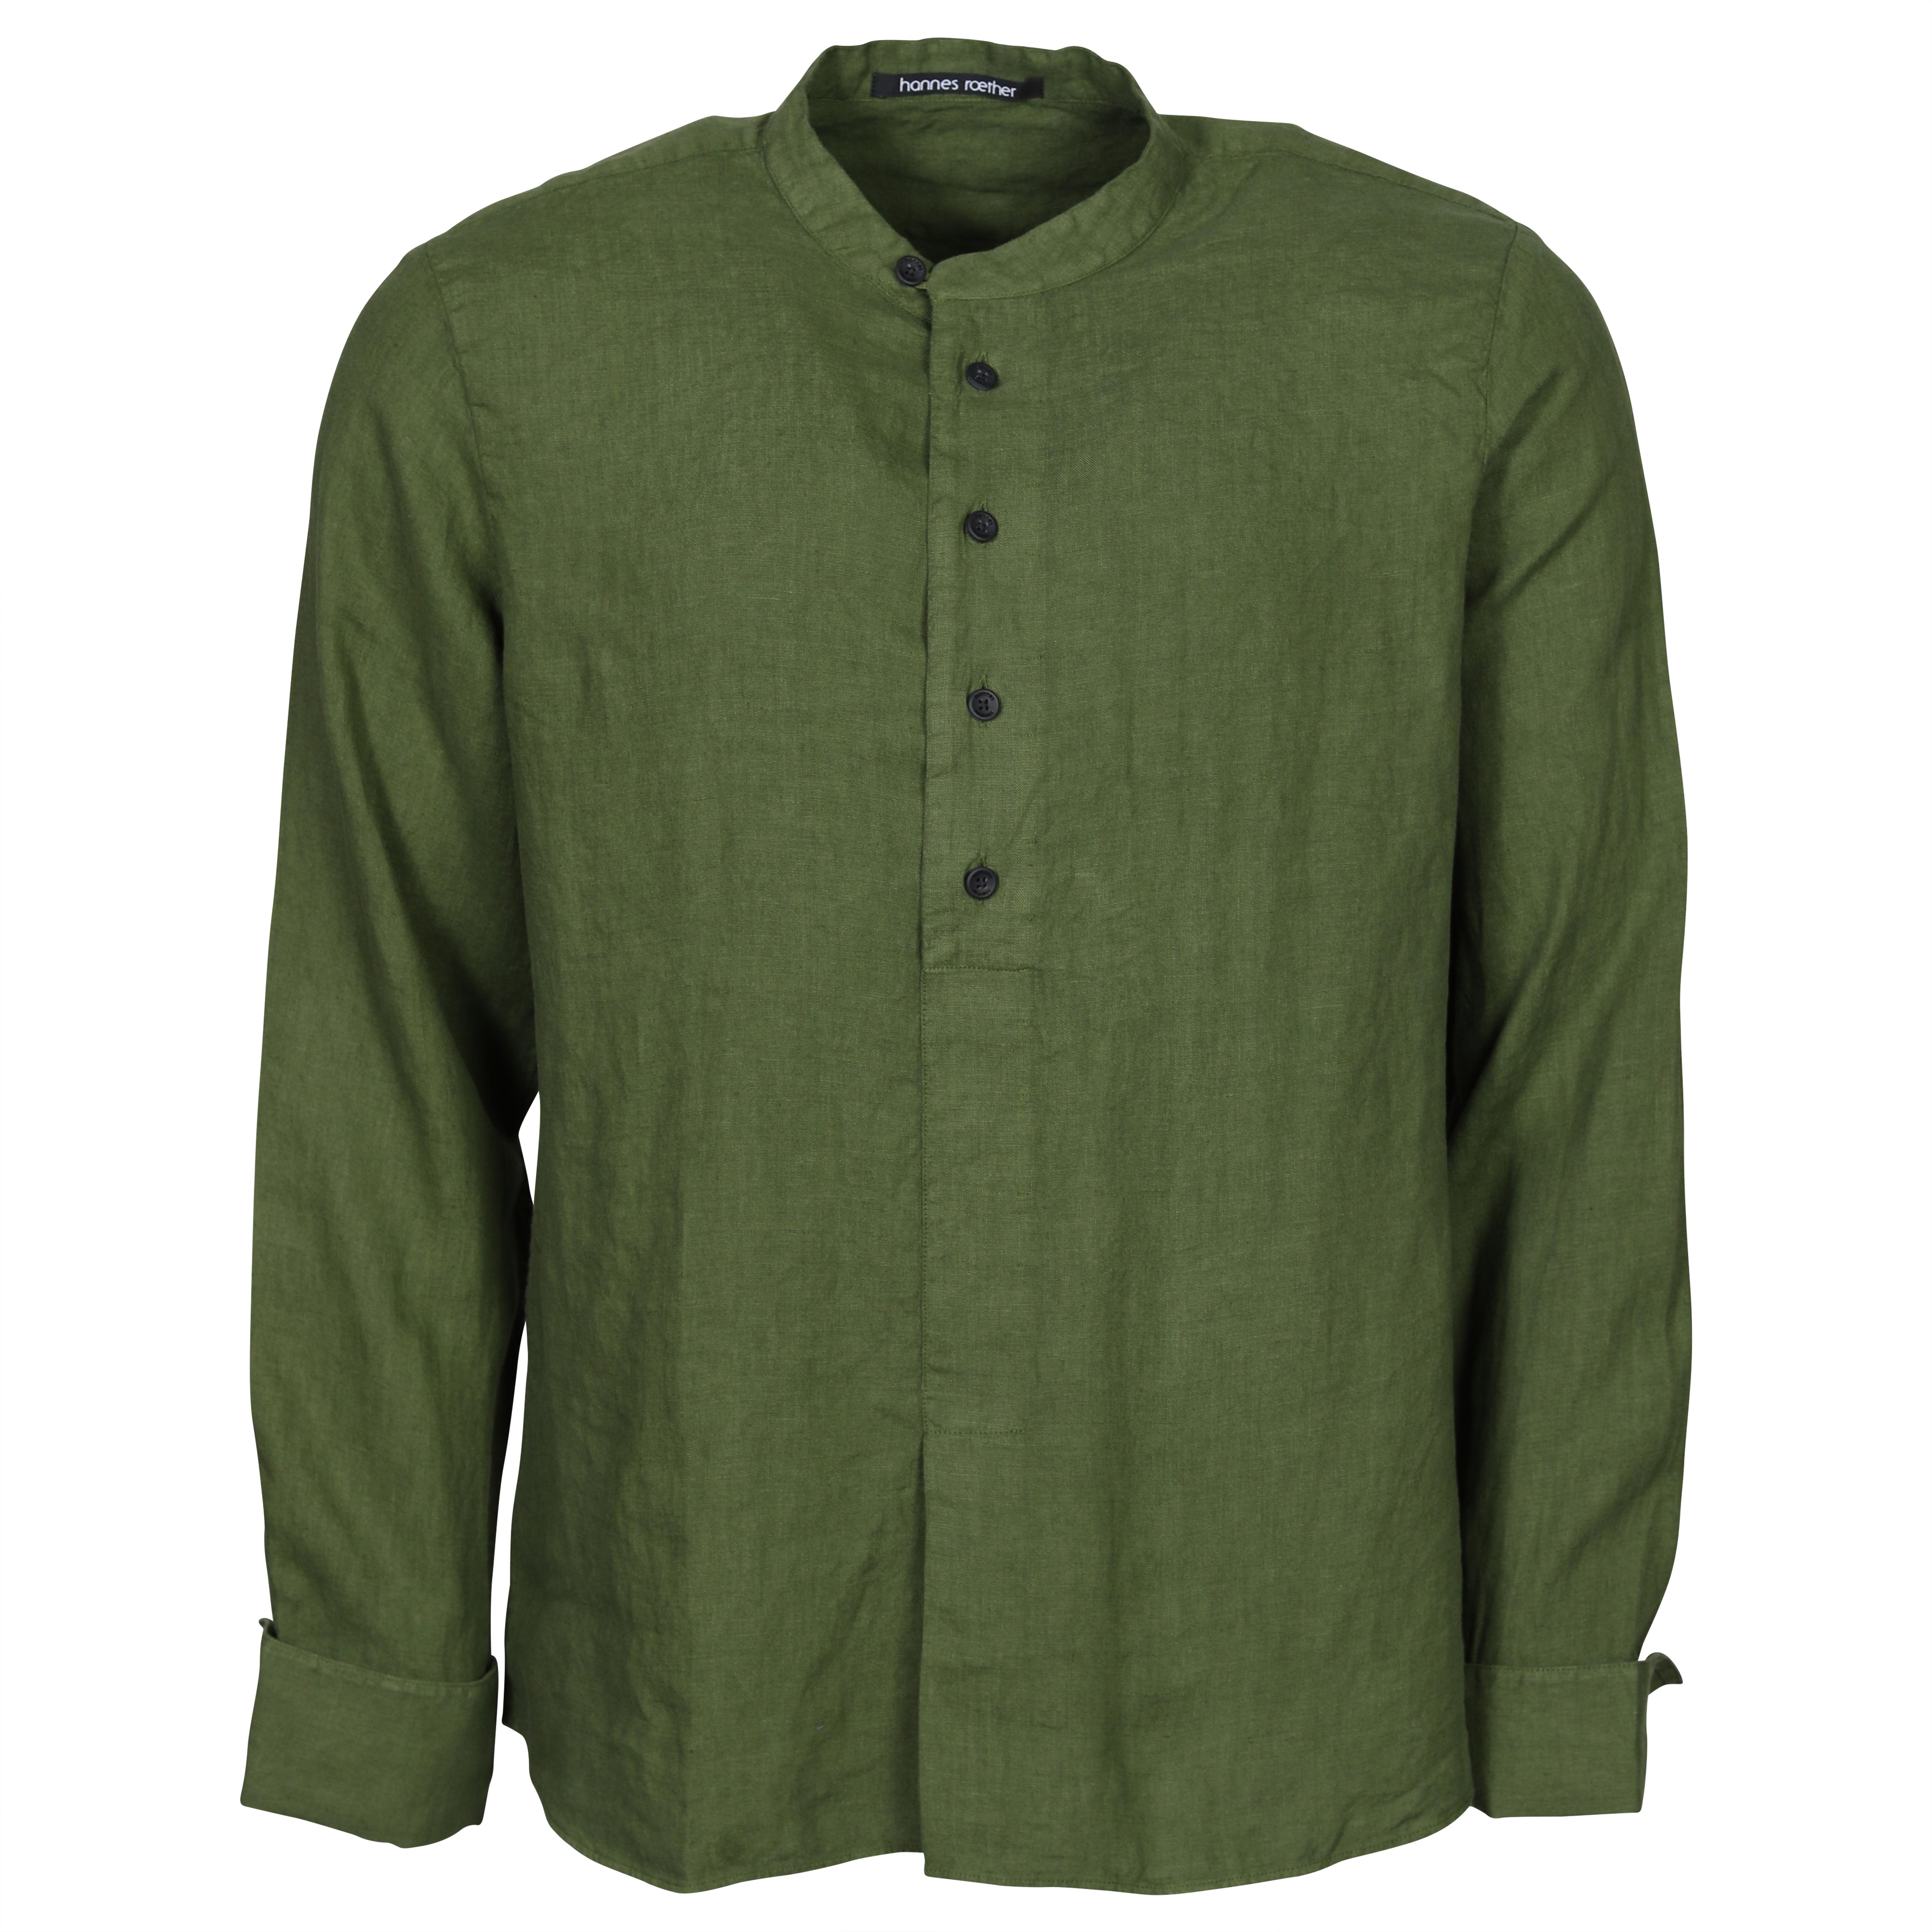 Hannes Roether Linen Tunic Shirt in Olive